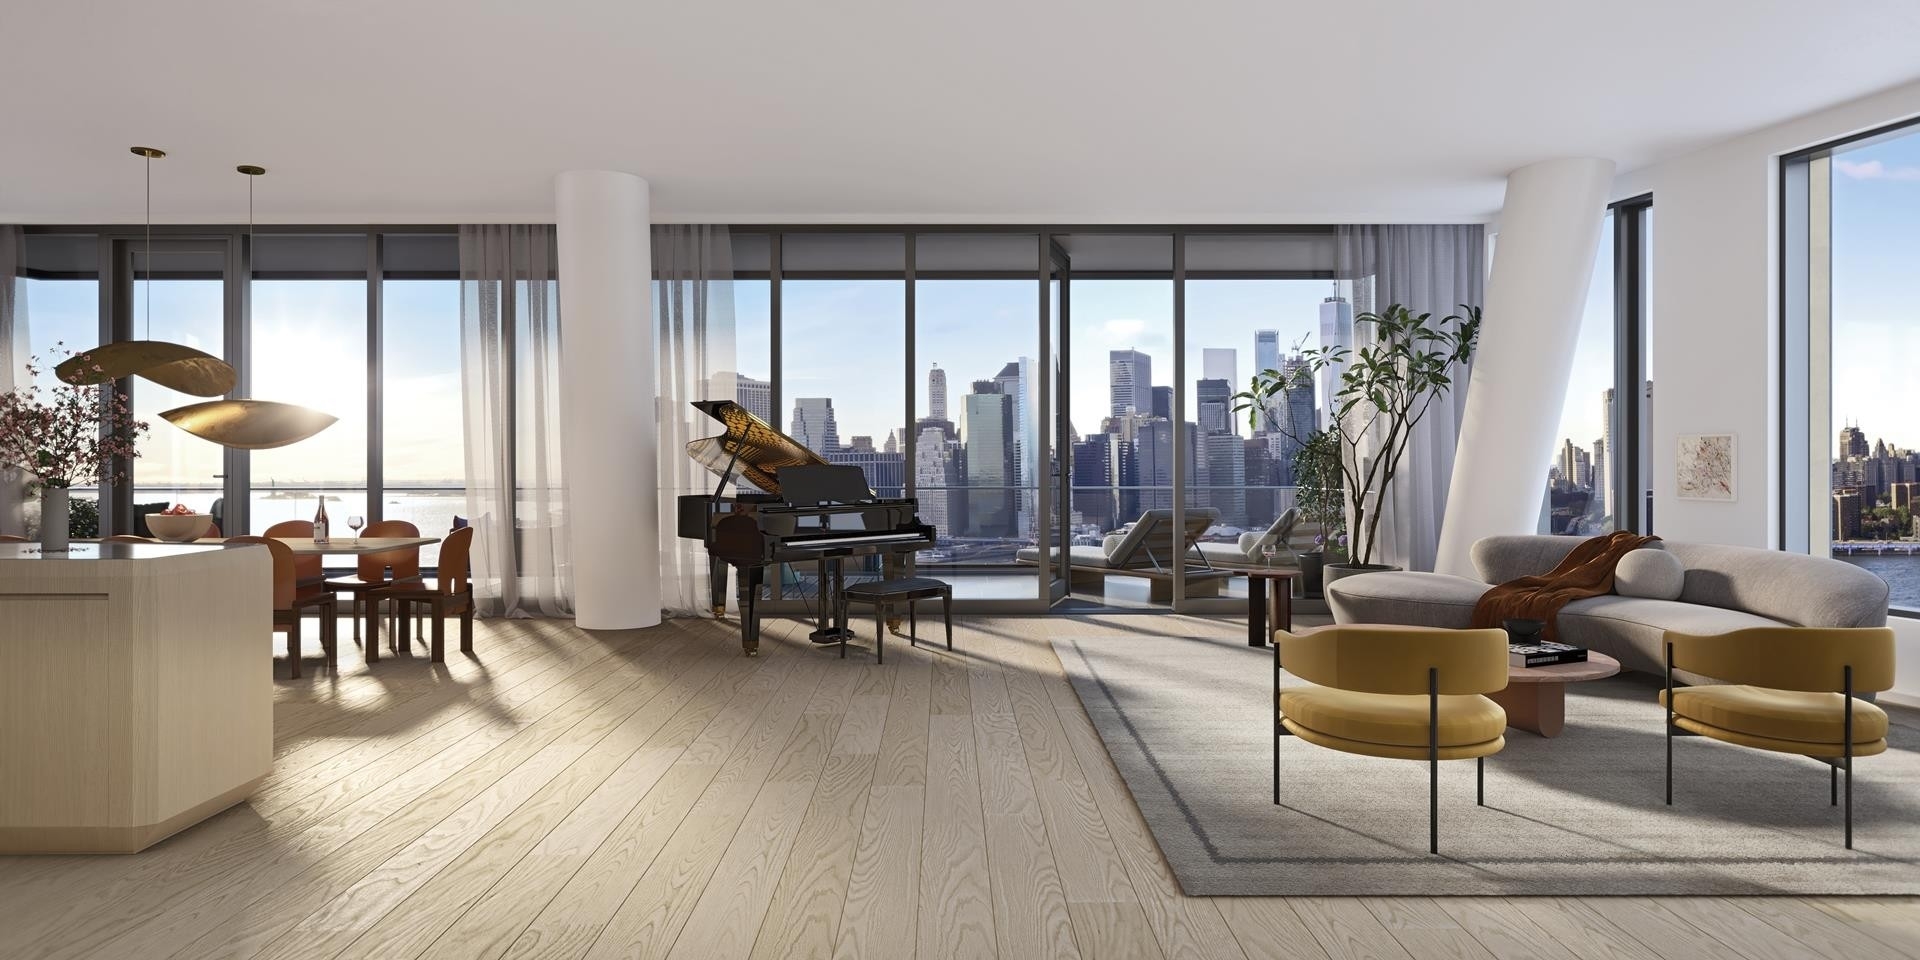 Condominium for Sale at Olympia Dumbo, 30 FRONT ST, 23A Brooklyn, NY 11201